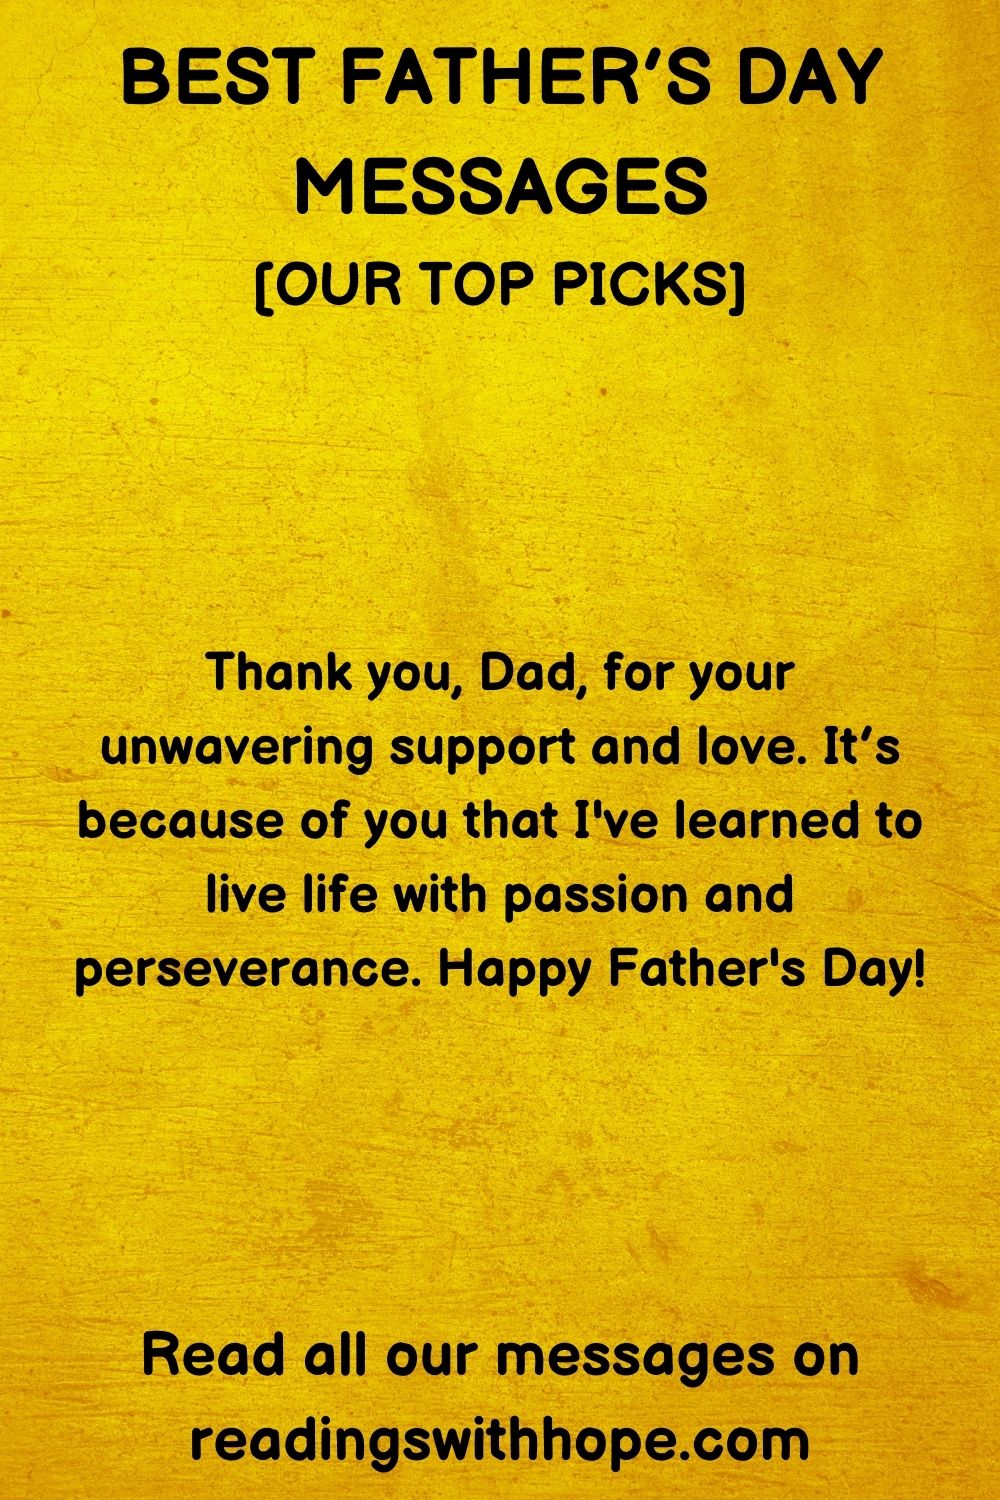 best father's day message